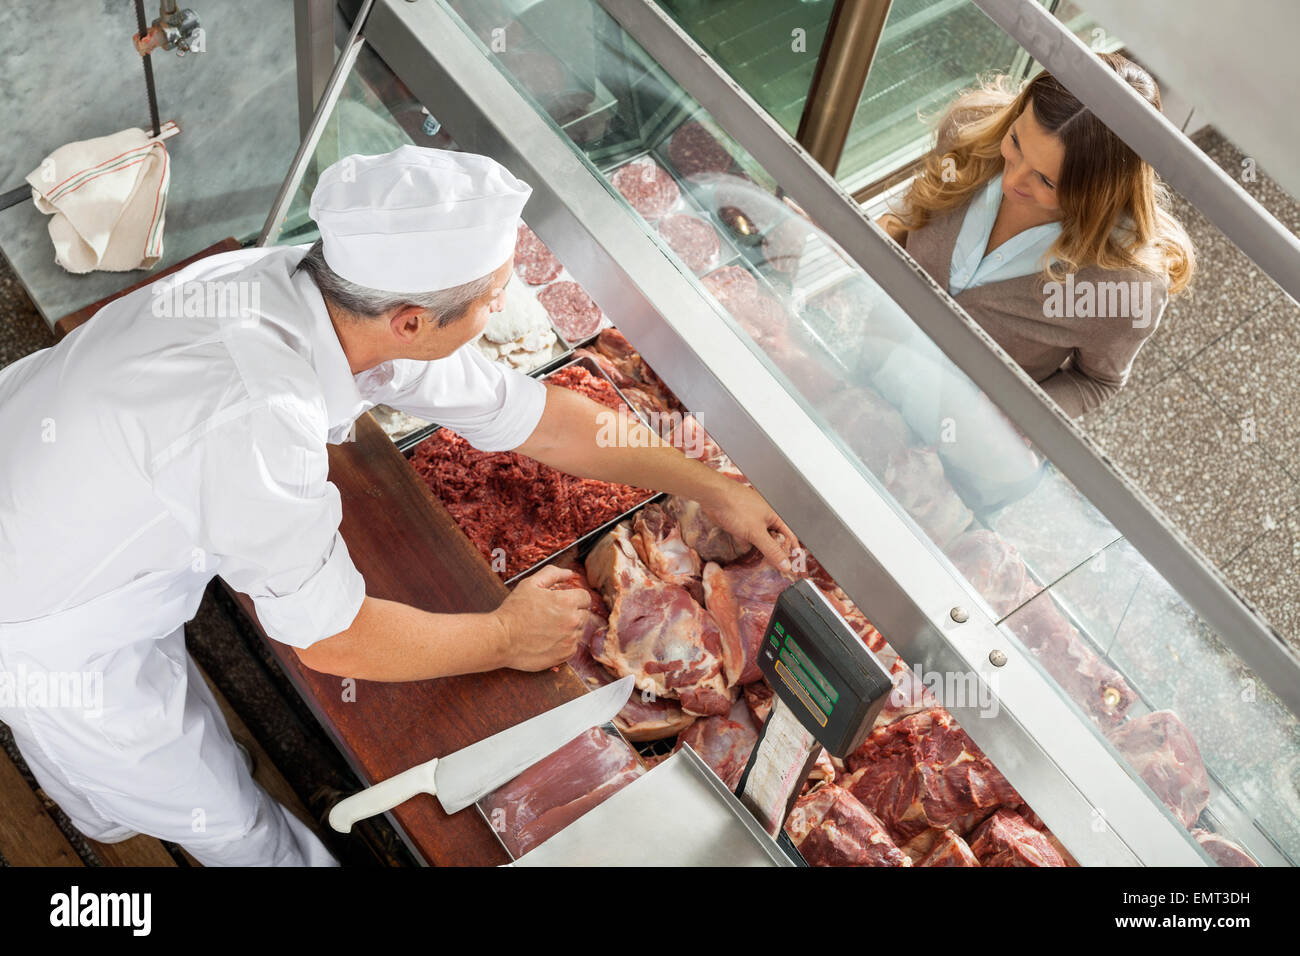 Butcher Selling Meat To Customer At Display Cabinet Stock Photo